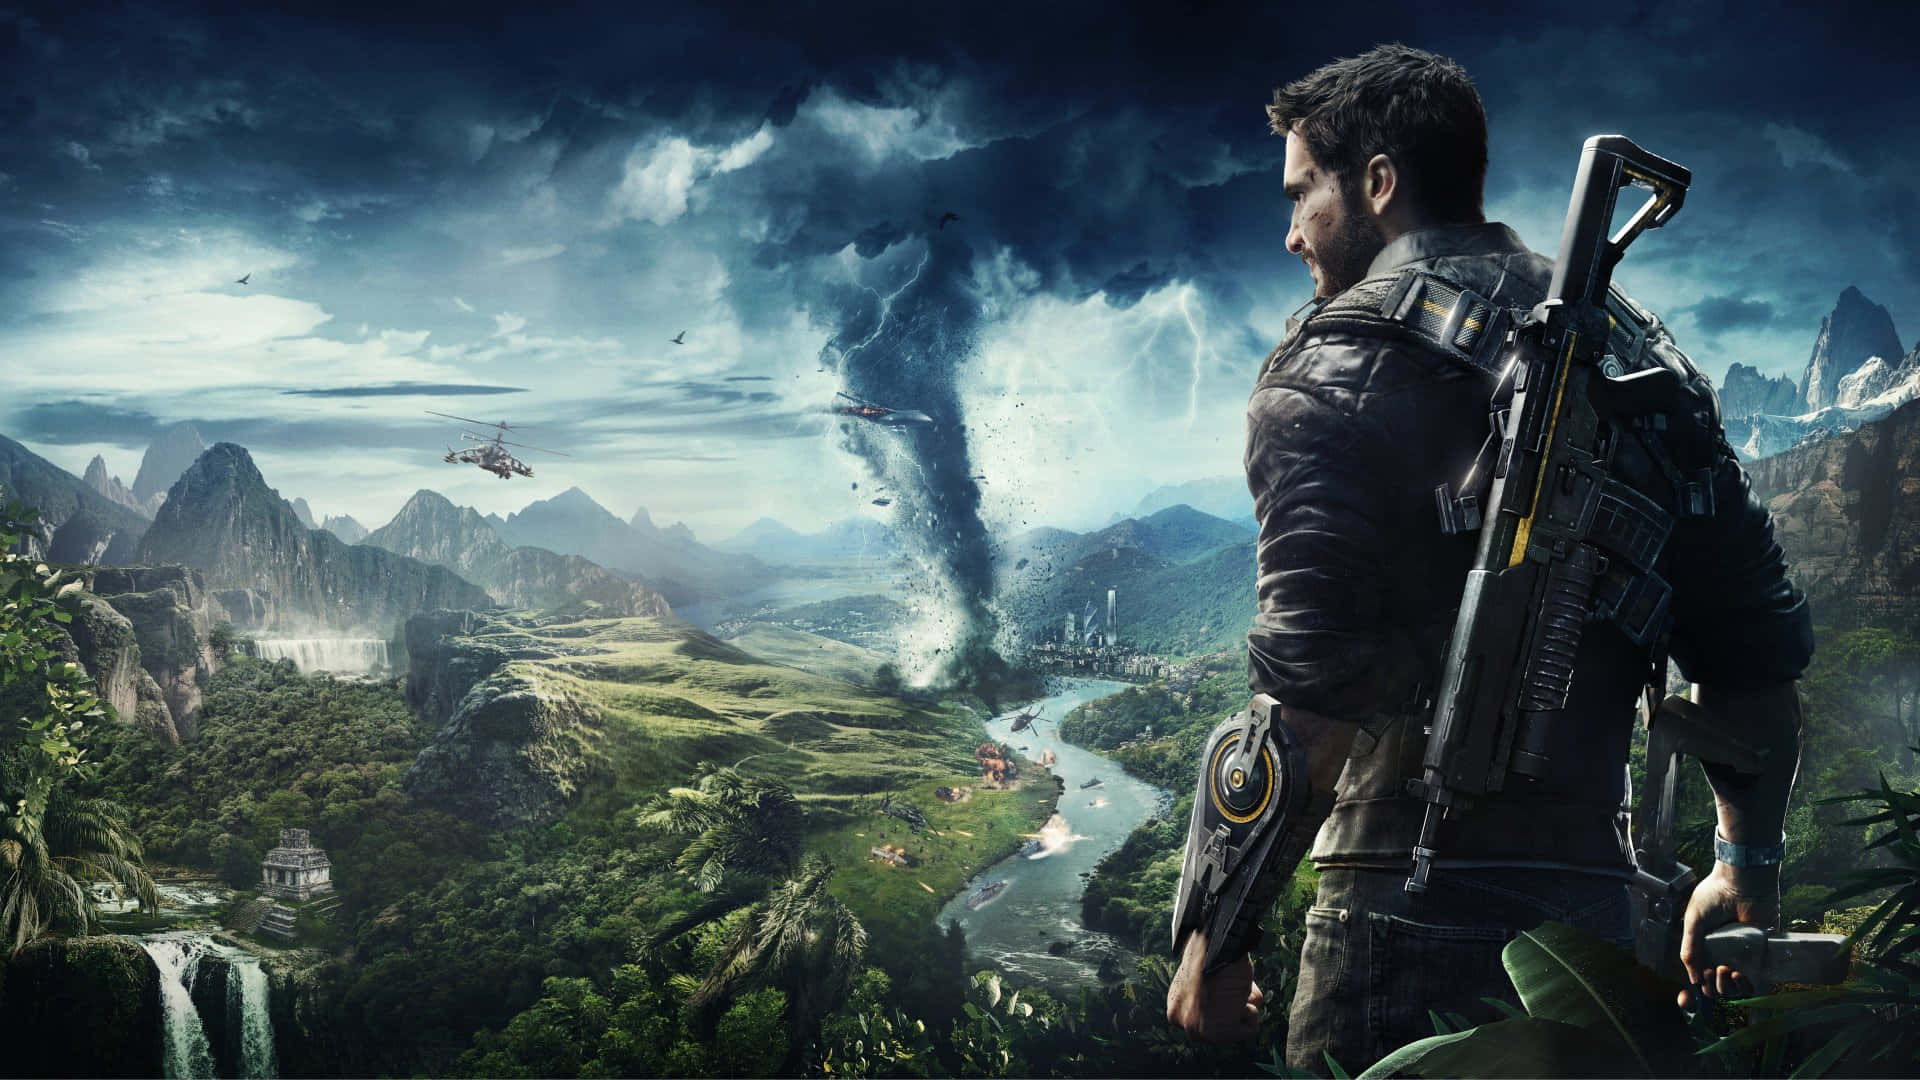 1920x1080 Just Cause 4 baggrund Mand Kigge på By